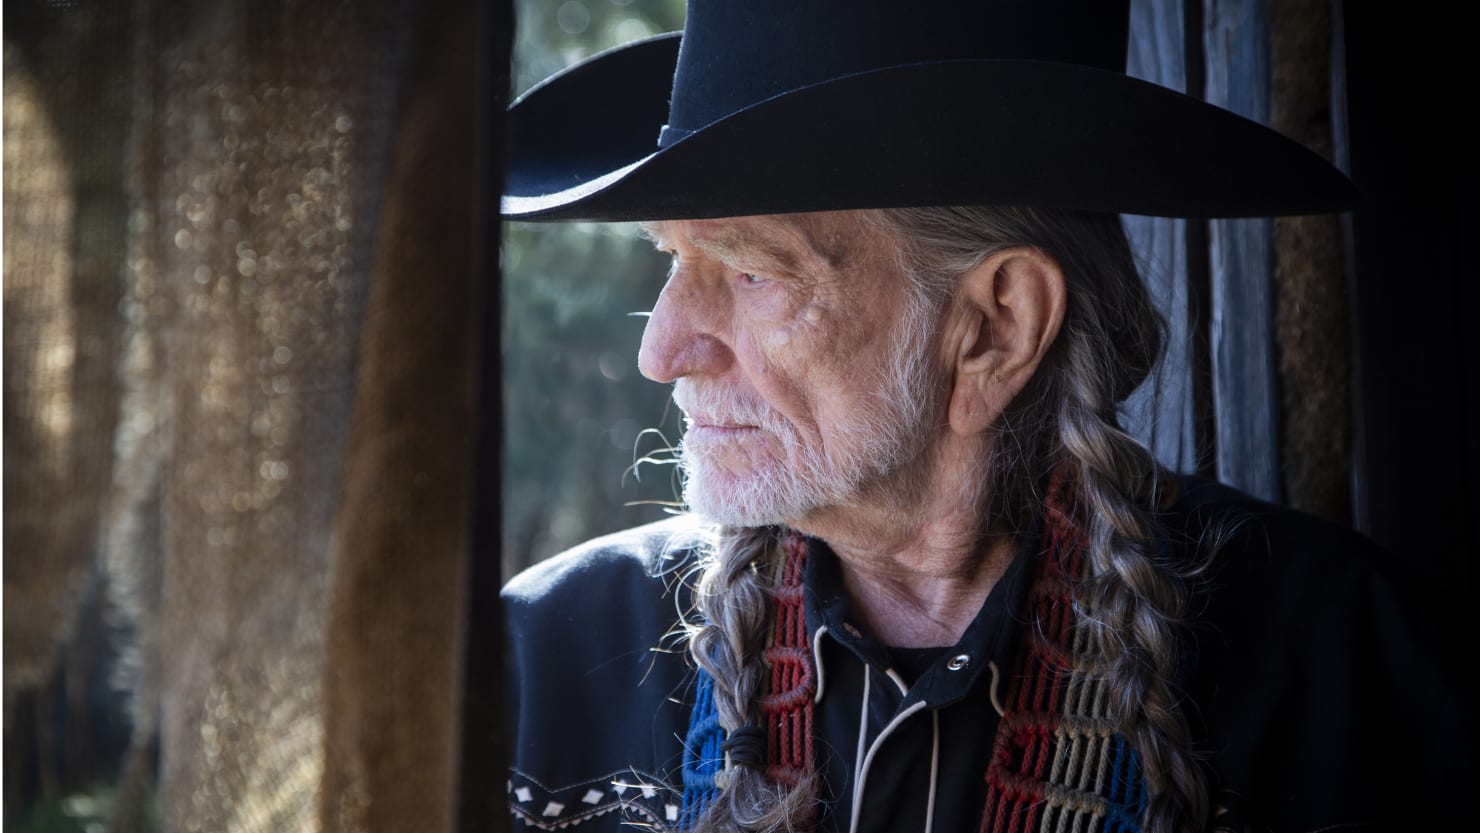 Willie Nelson on Smoking With Snoop and Marathon Sex: 'My Life Has Bee...